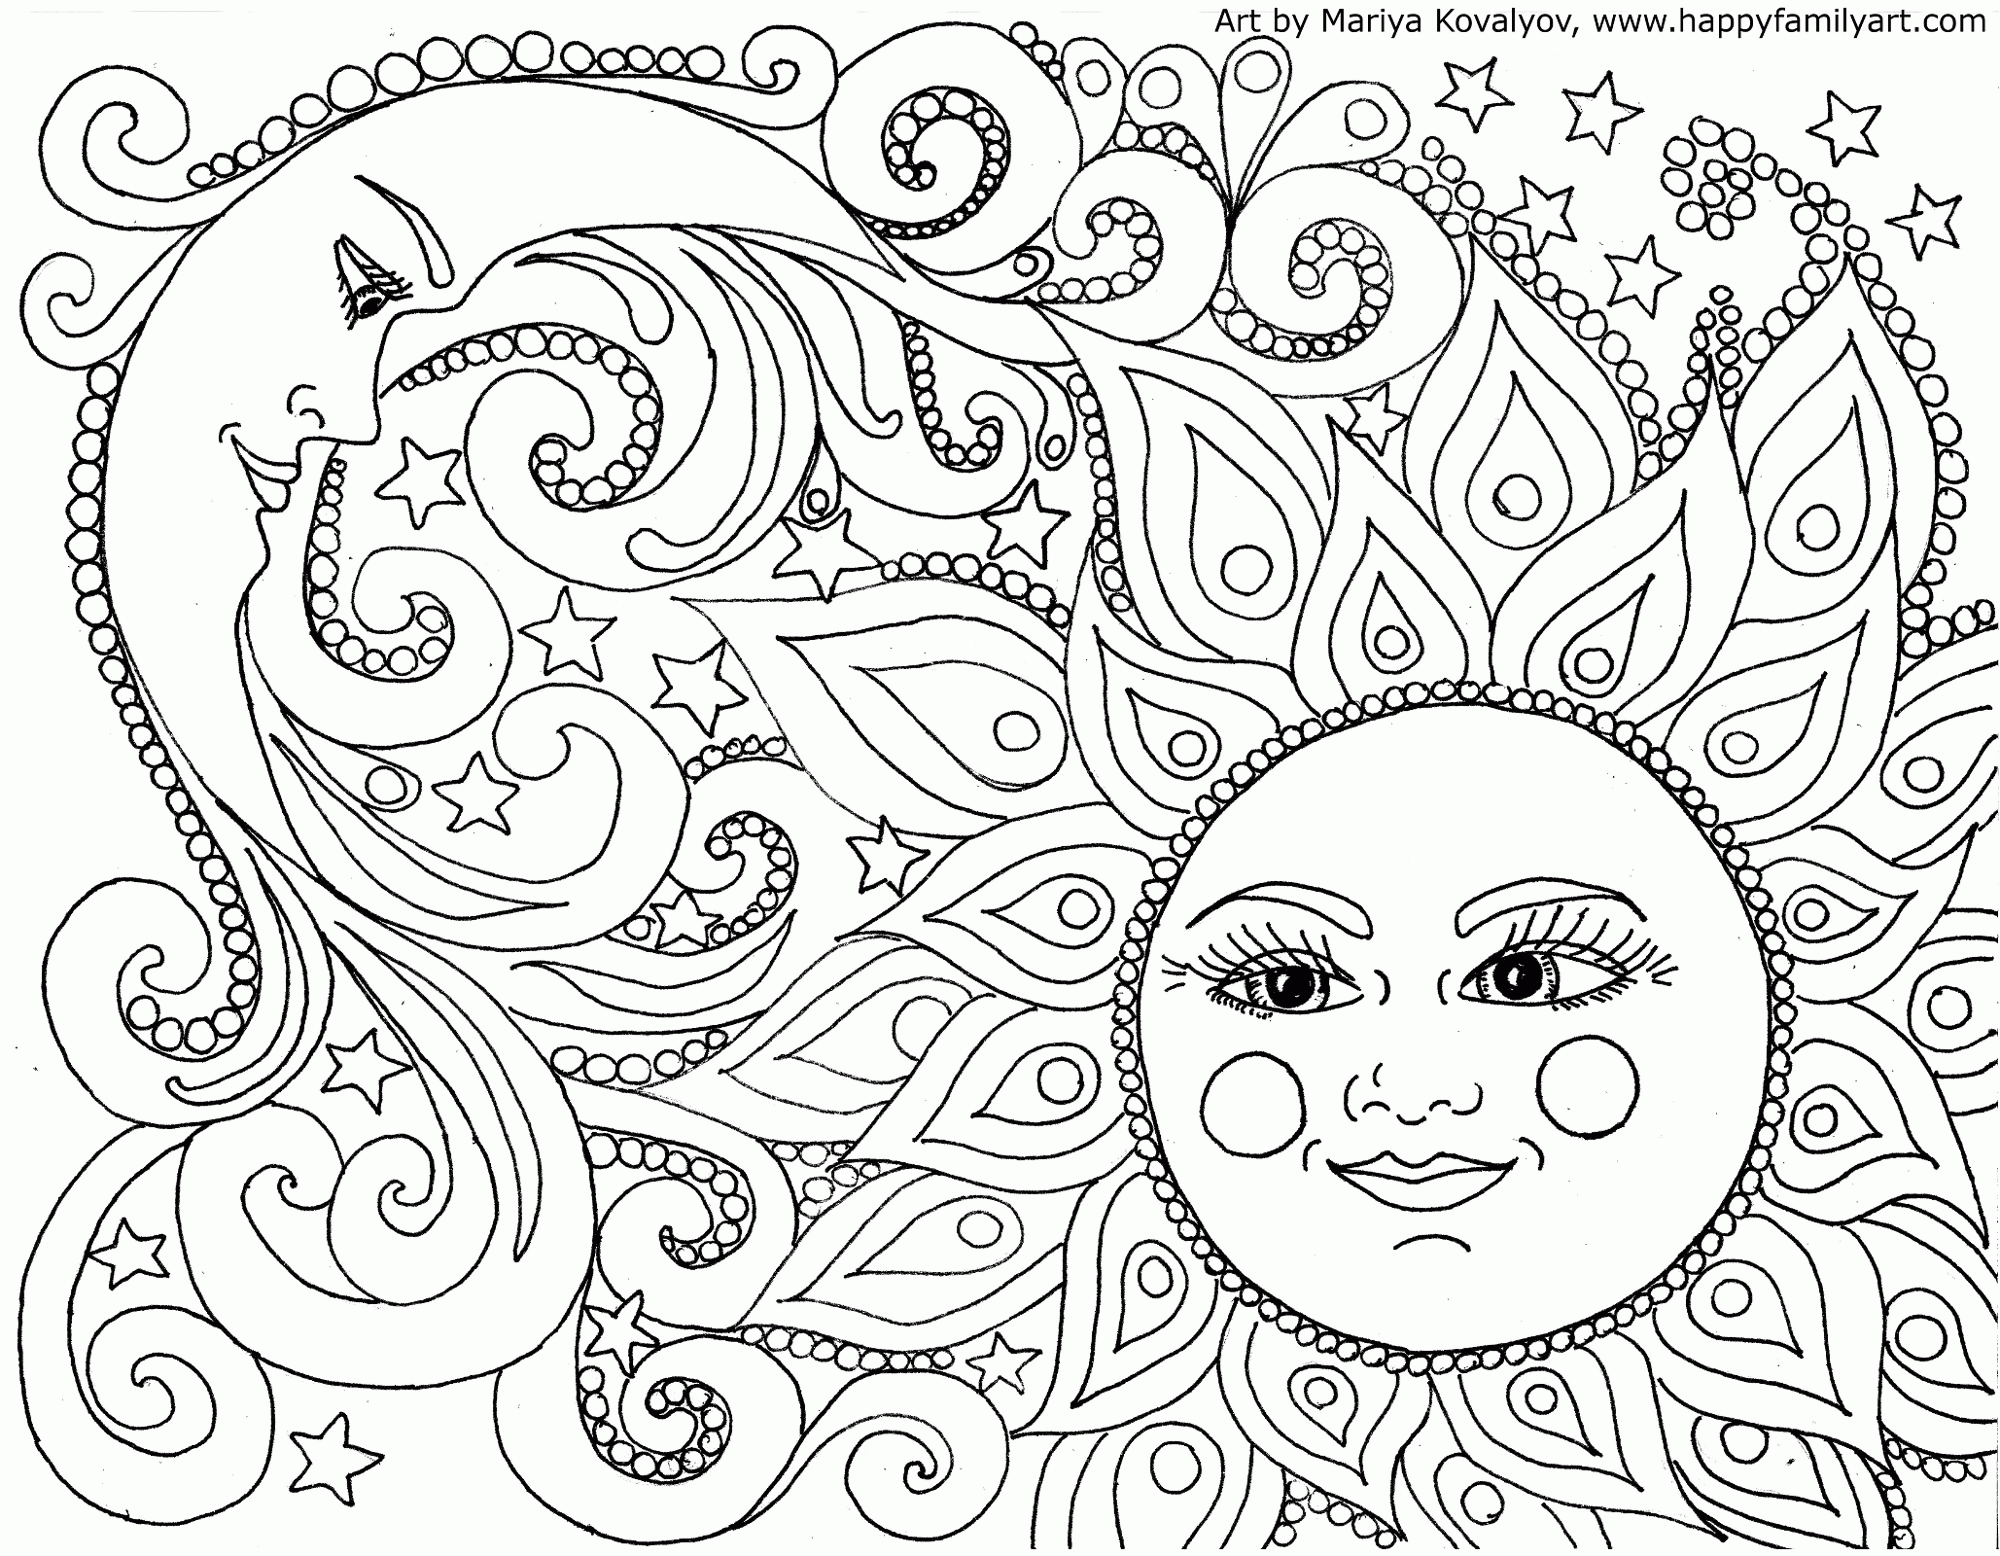 Free Printable Coloring Pages for Adults {12 More Designs